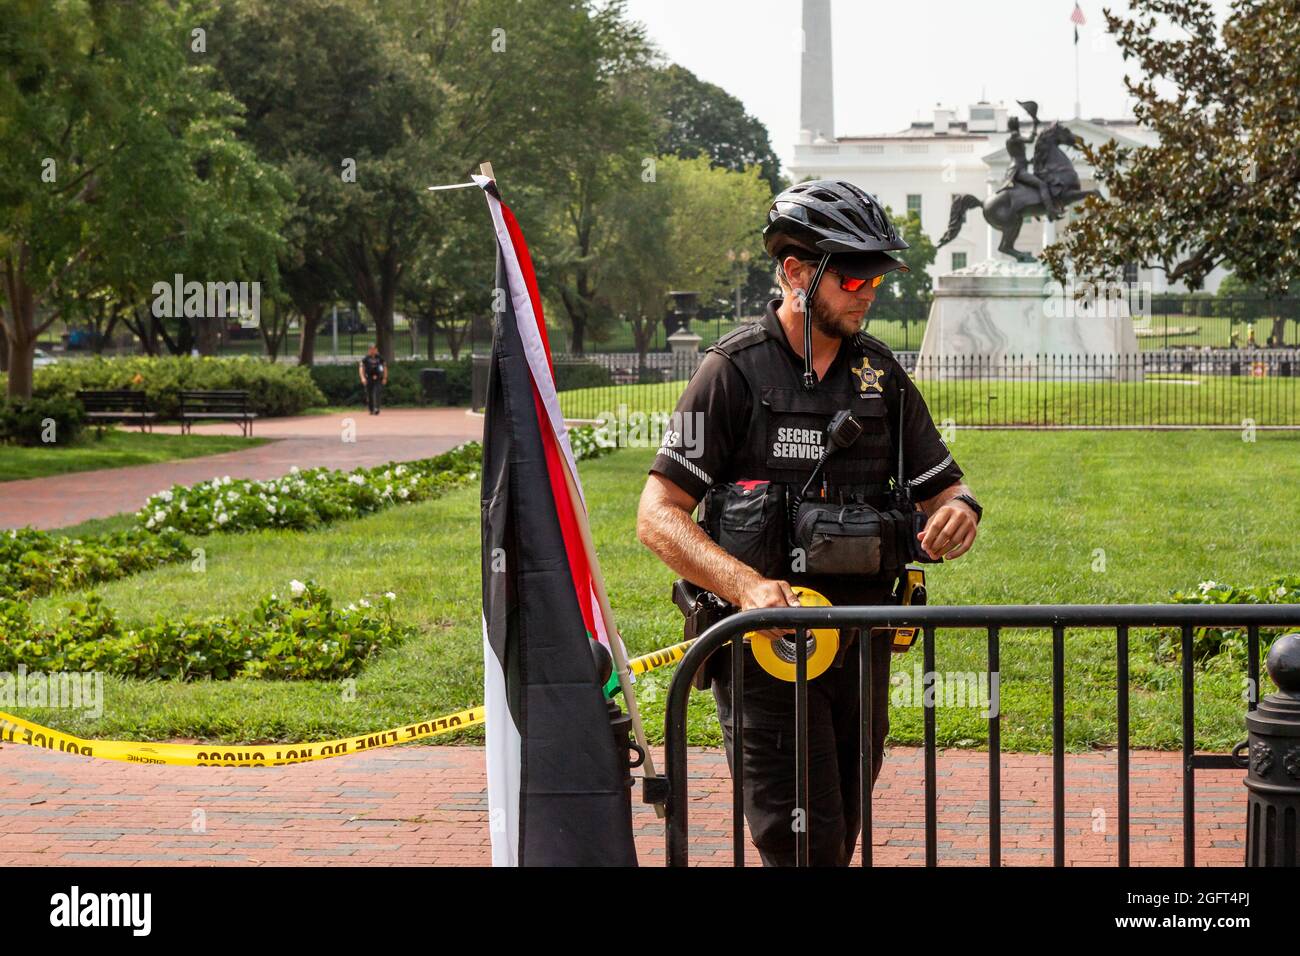 Washington, DC, USA, 26 August, 2021.  Pictured: A Secret Service officer establishes a police line after ordering Palestinians and supporters to leave Lafayette Park during a protest against Naftali Bennett’s first visit to the White House as prime minister of Israel.  The order to leave is highly unusual, as Secret Service allows protests in the park every day.  Credit: Allison Bailey / Alamy Live News Stock Photo